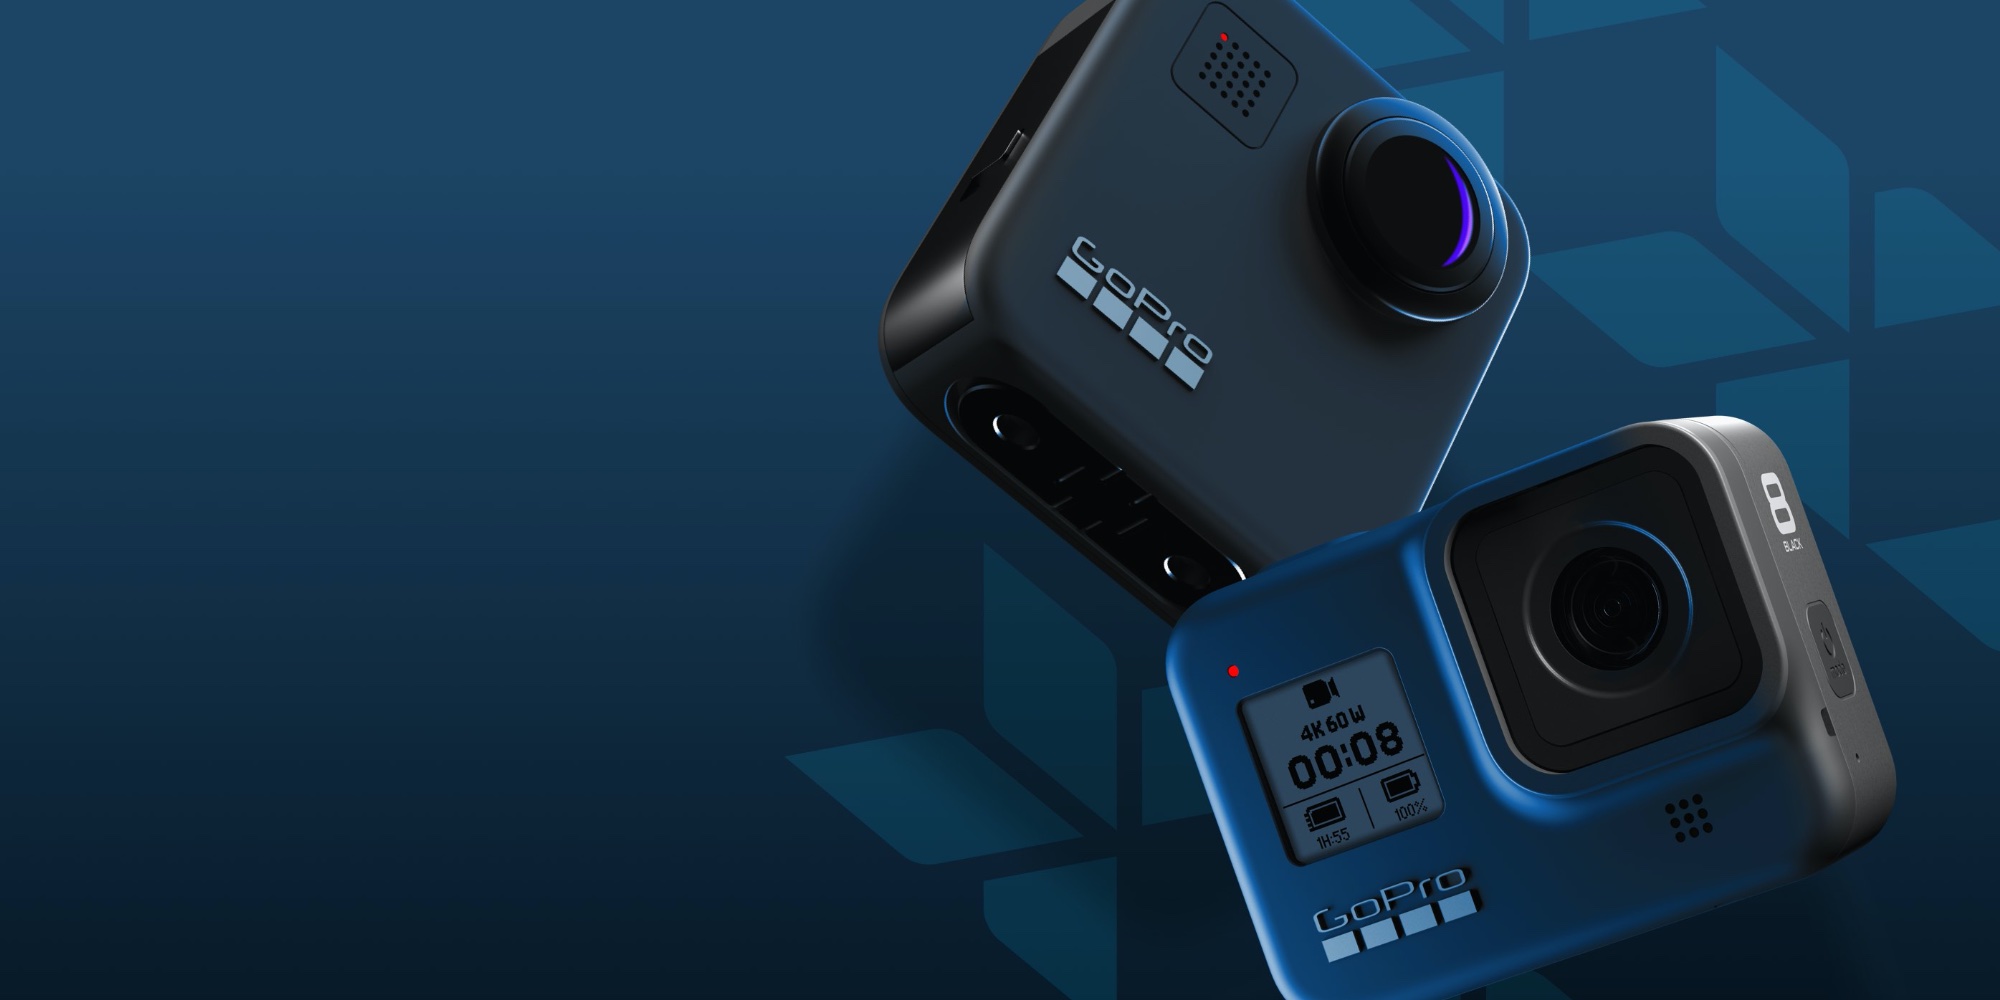 GoPro MAX Camera sees first price cut in $350 bundle ($459 value), more